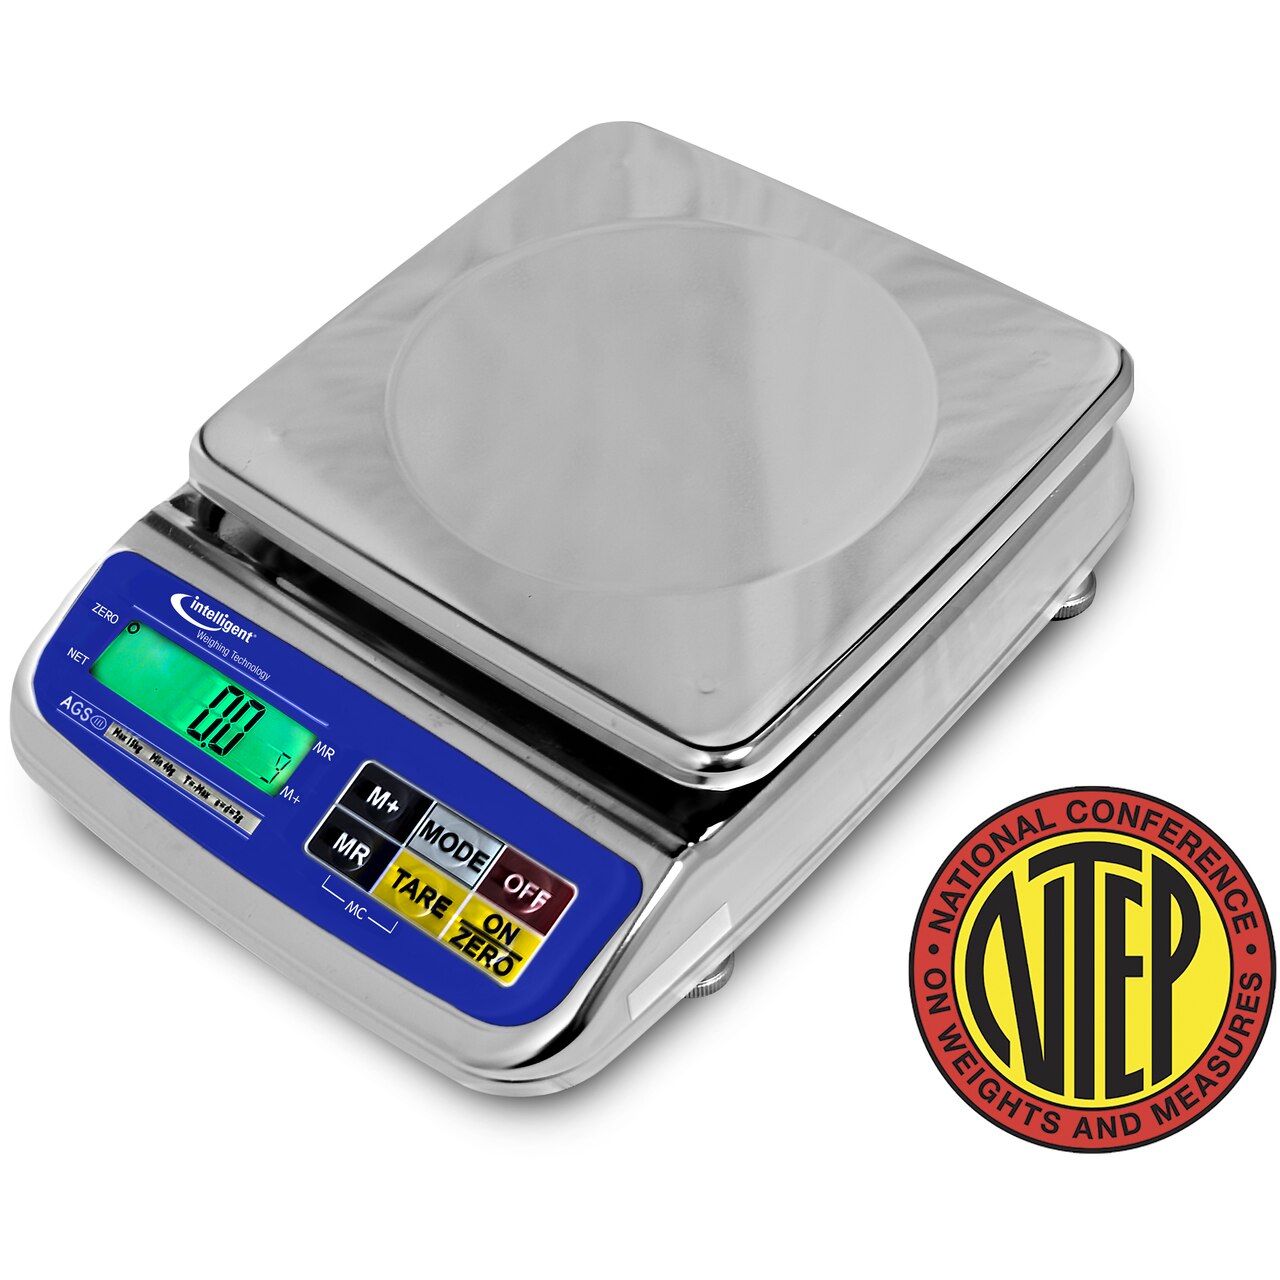 Intelligent Weighing AGS-6000BL Toploading Bench Scale, 13.2 lb x 0.005 lb